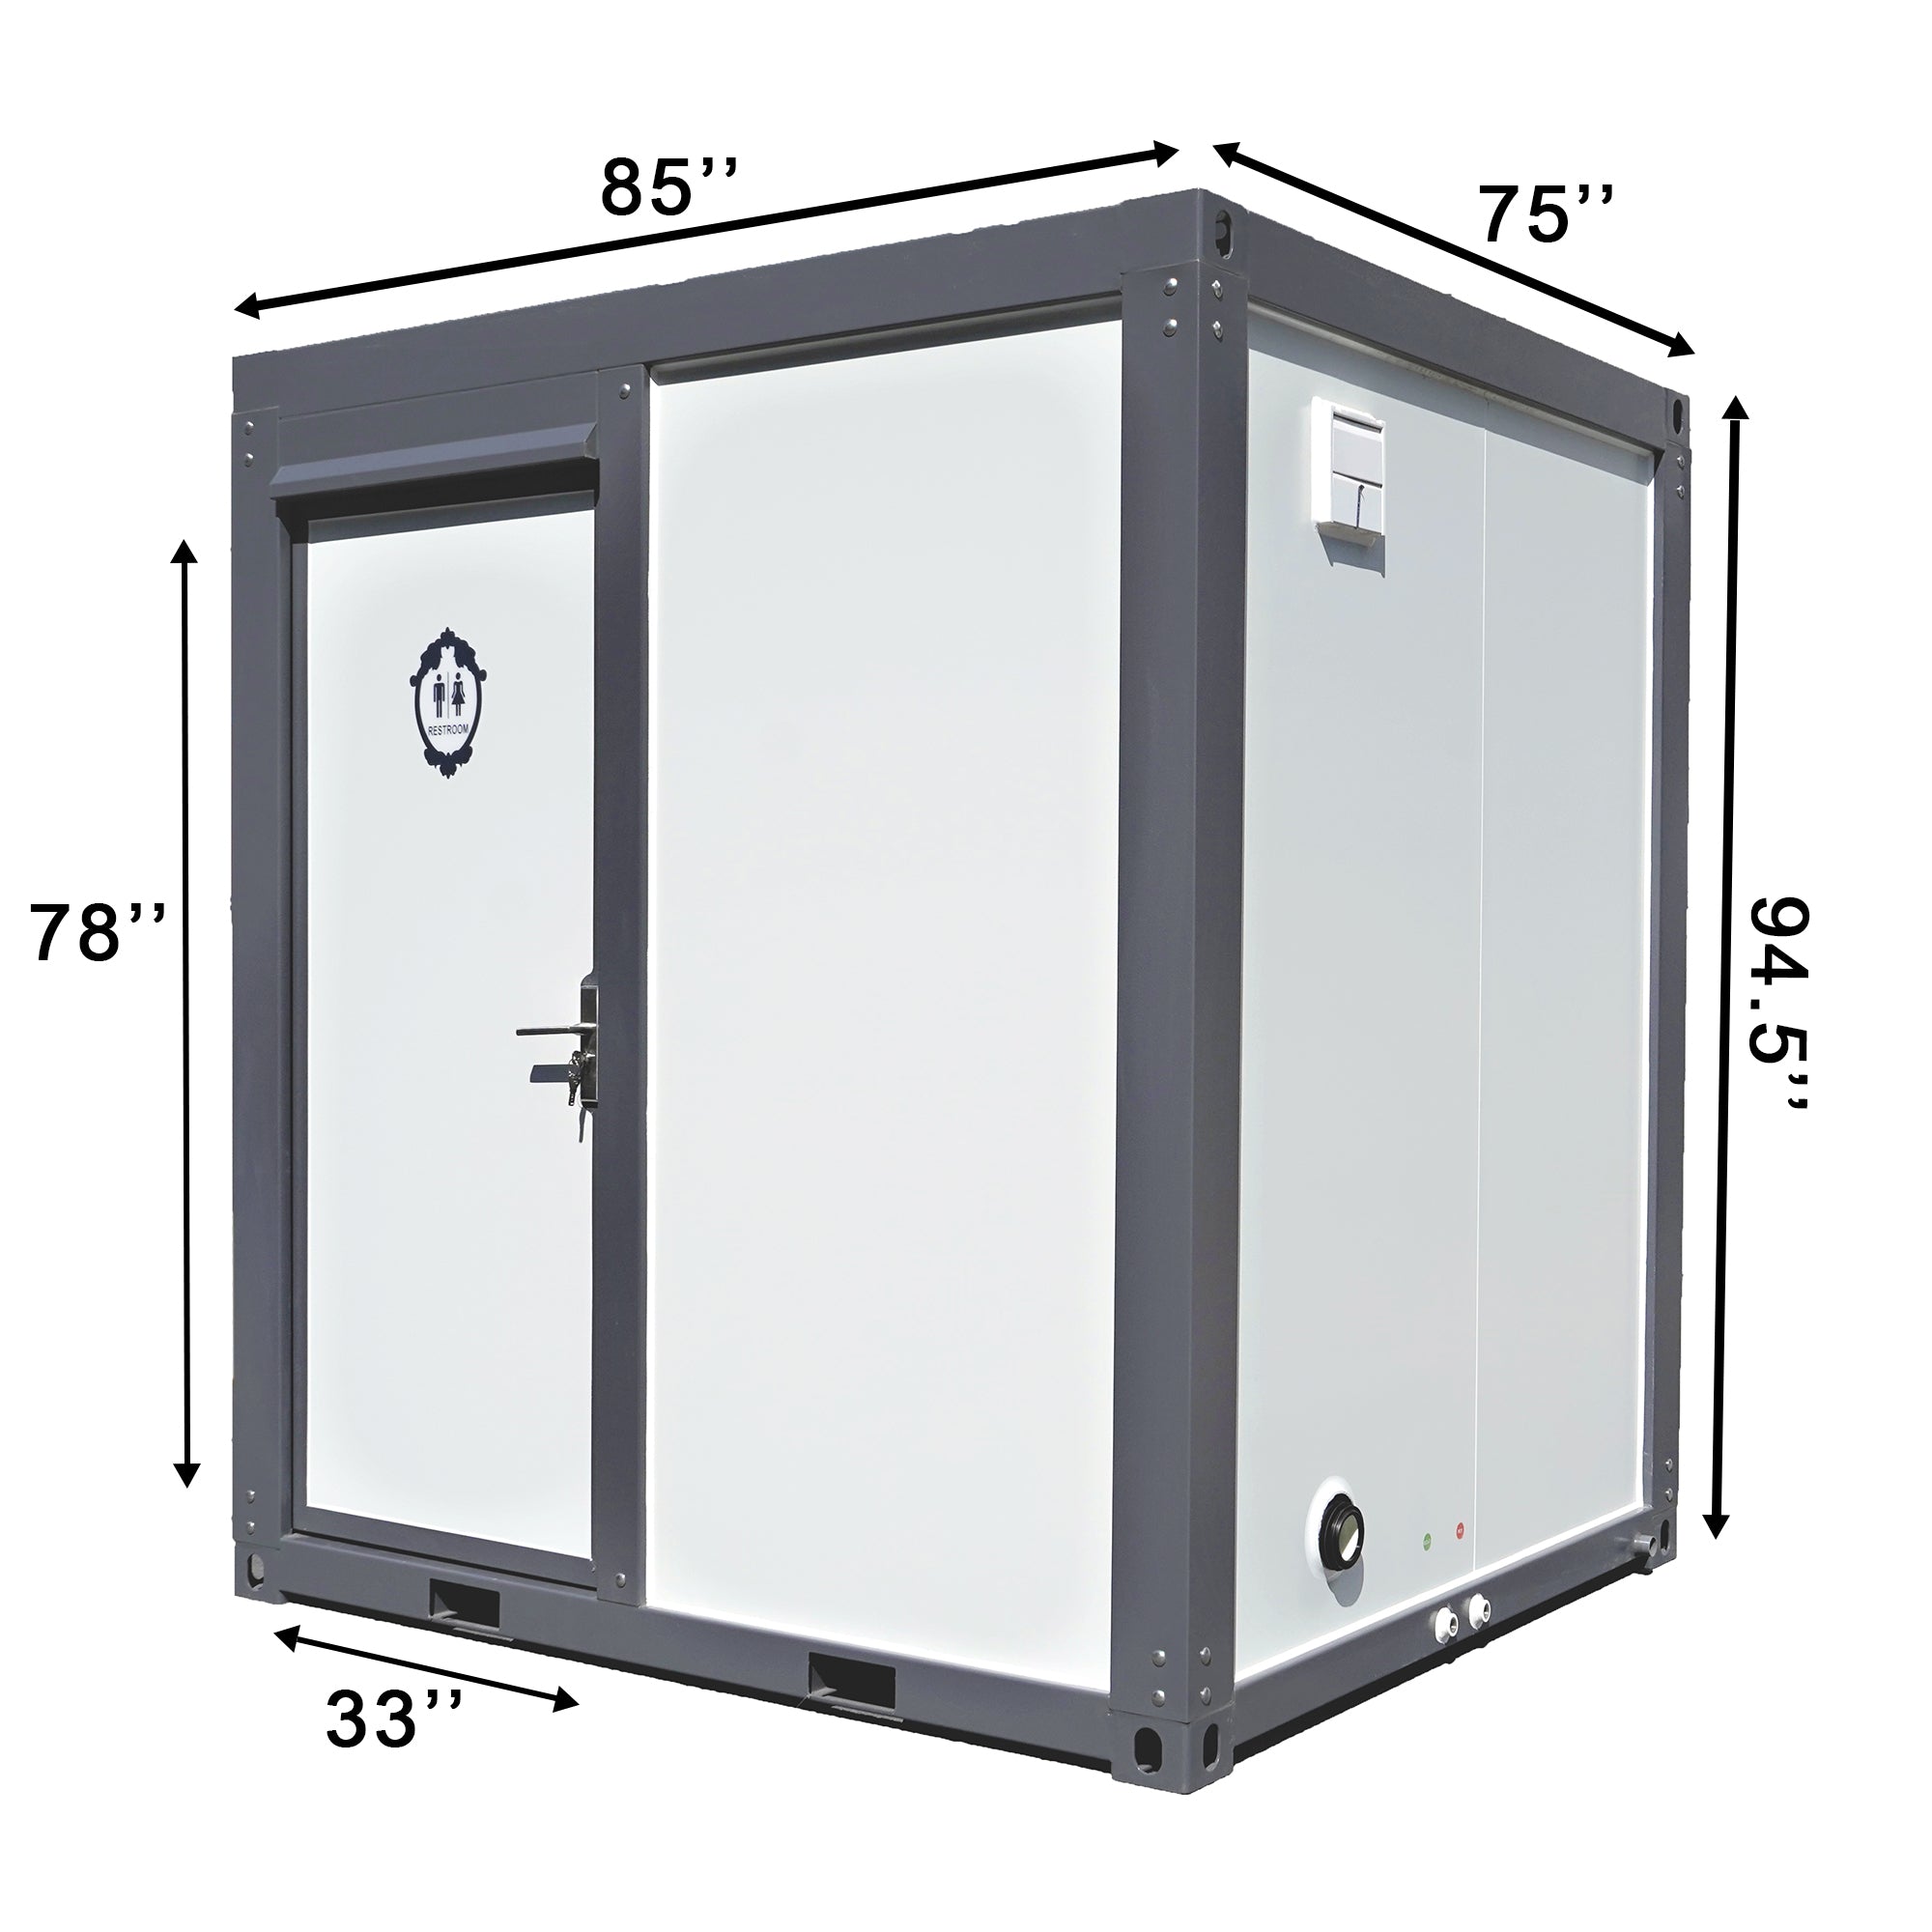 [AS-IS] Bastone Portable Restroom w/ Showers